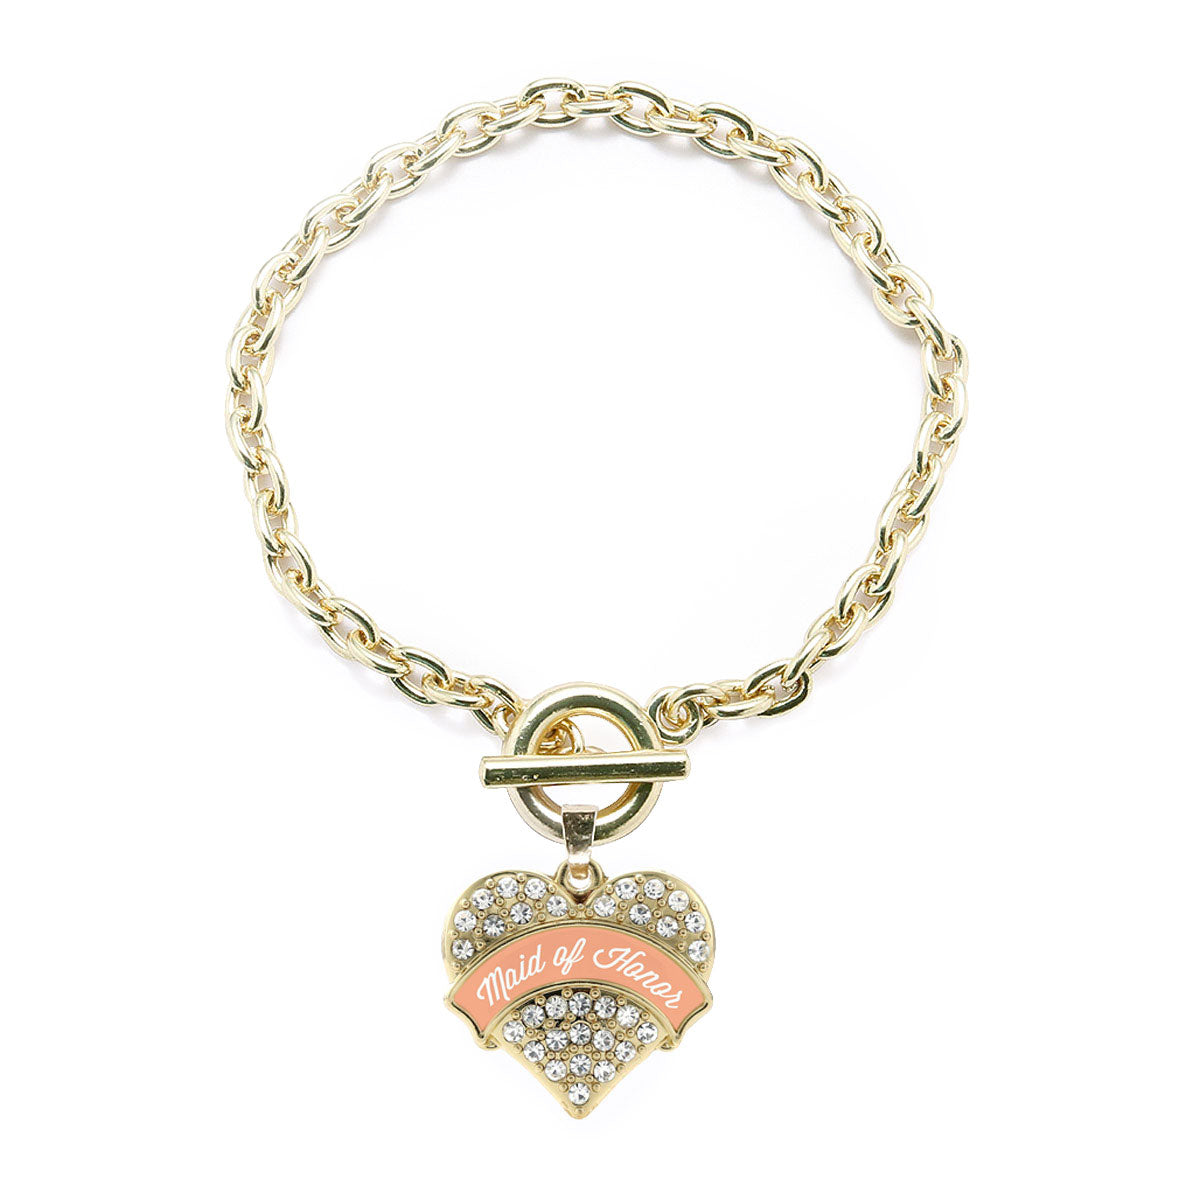 Gold Peach Maid of Honor Pave Heart Charm Toggle Bracelet